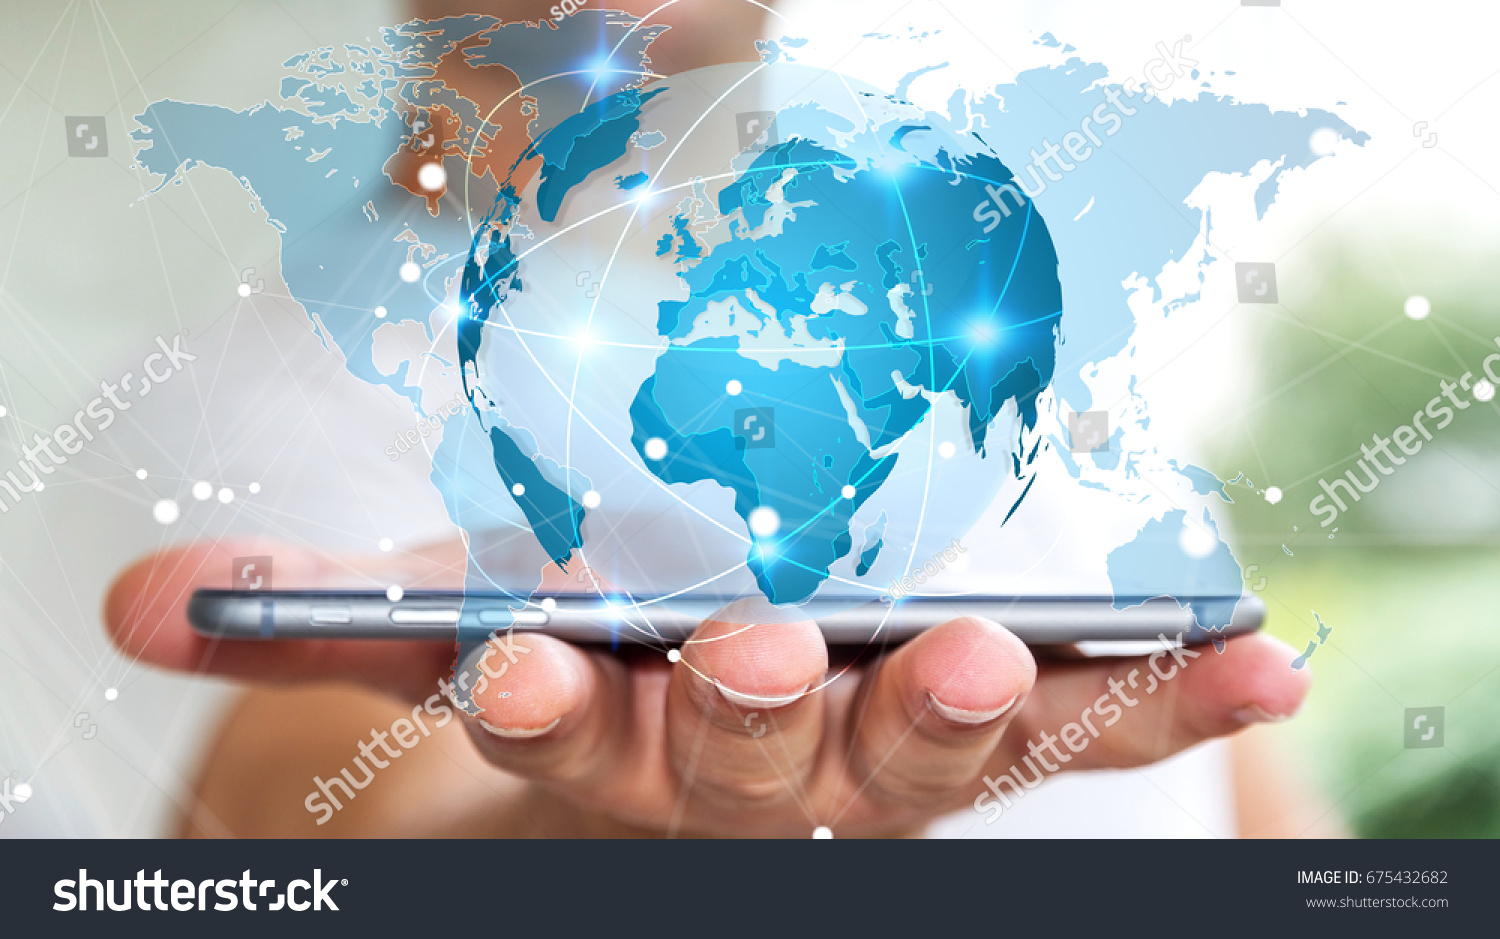 Businessman holding global network and data exchanges over his phone 3D rendering #675432682